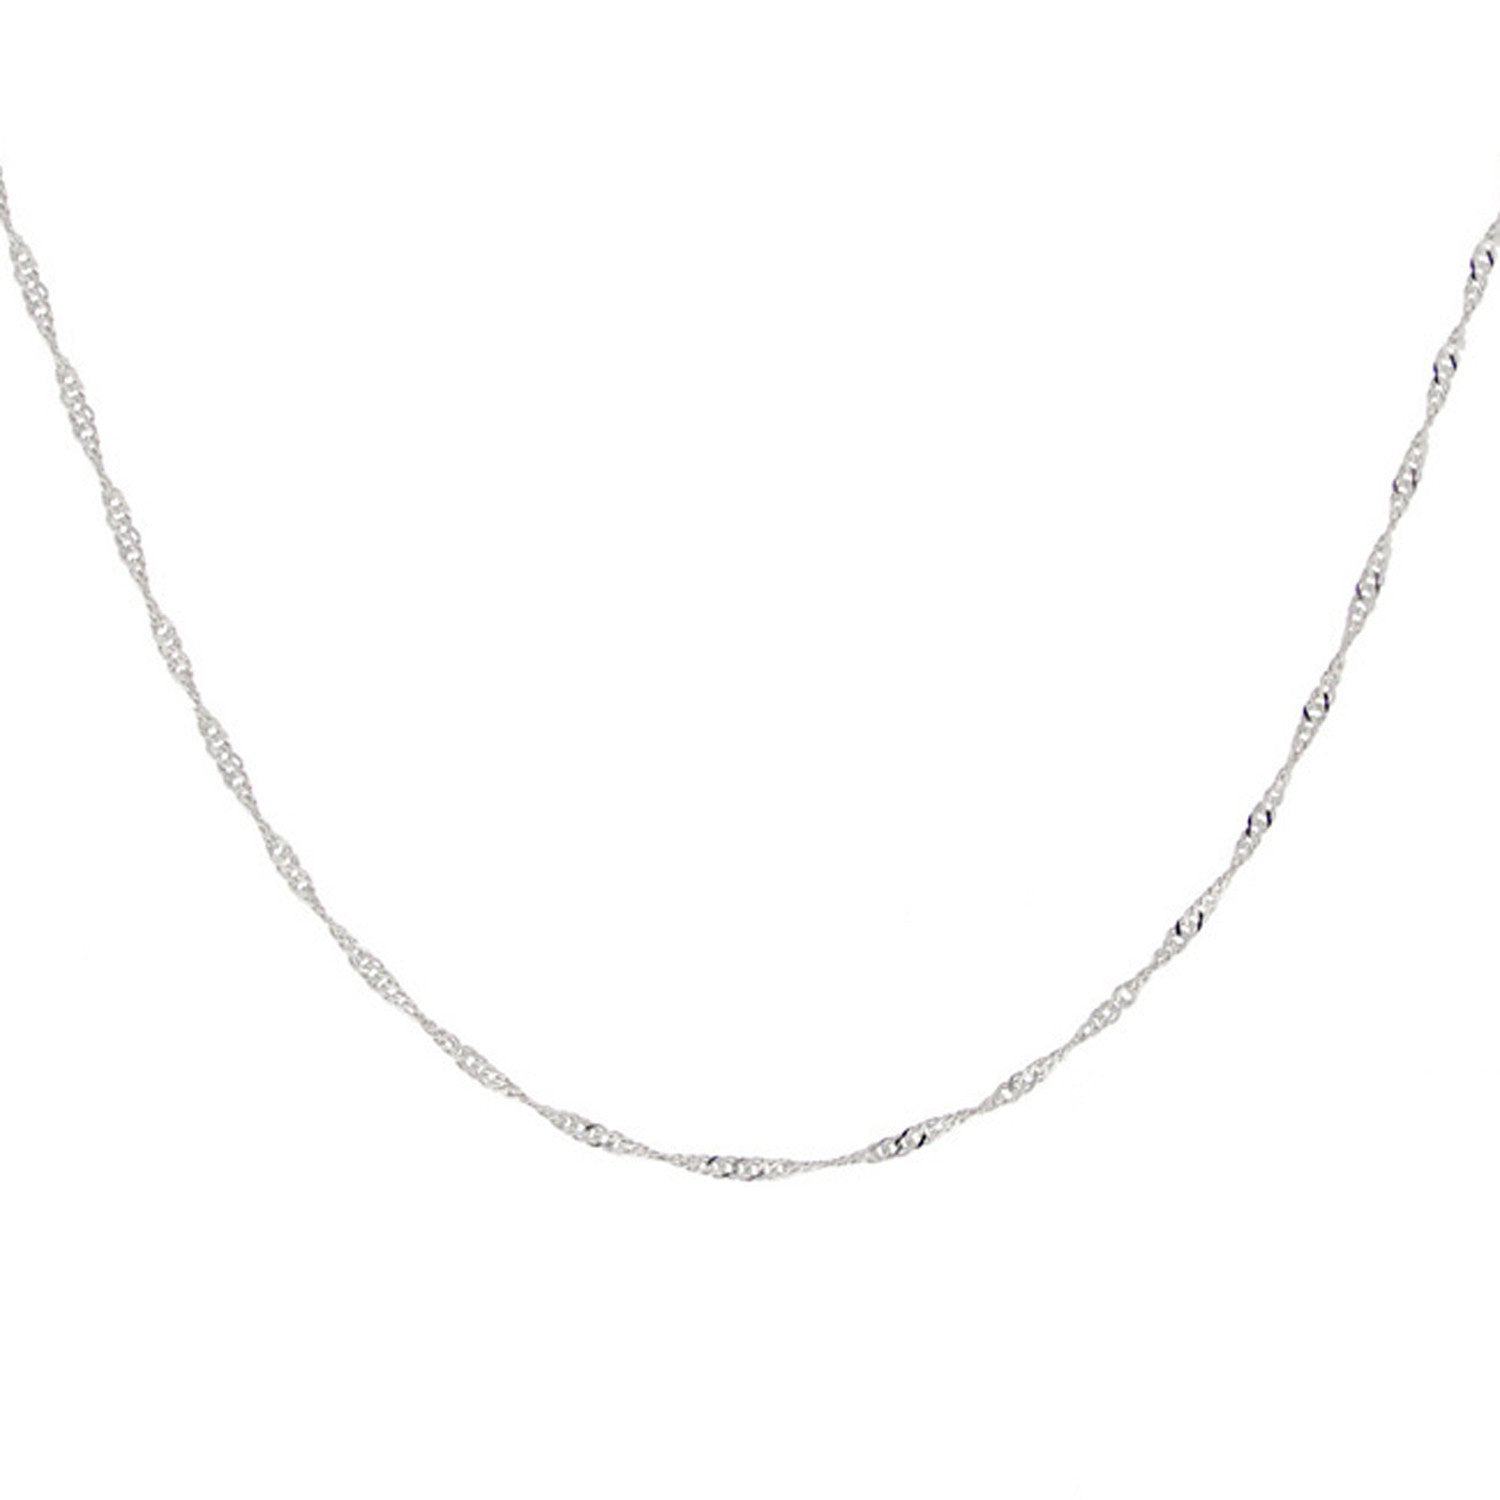 Sterling Silver Italian Chain With Singapore Design Necklace - 24 Inches